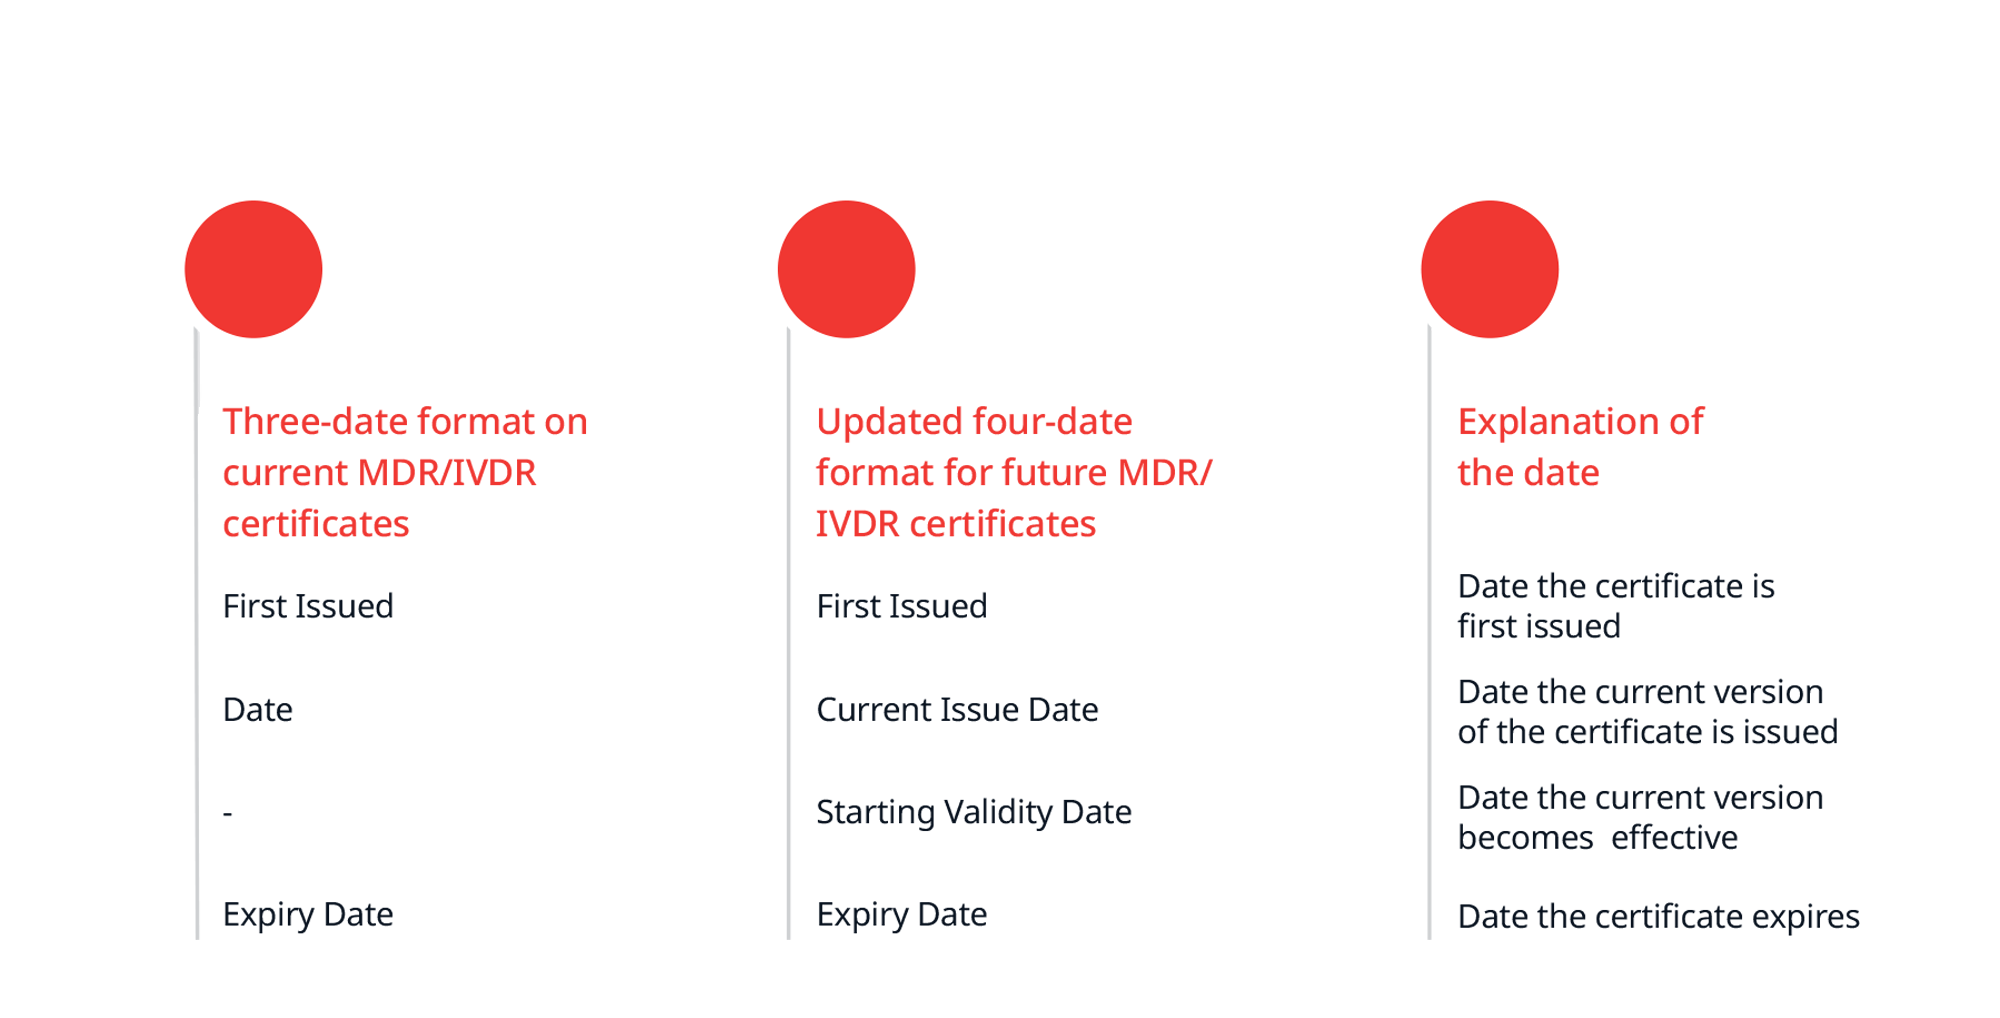 MDR/IVDR certificates already issued